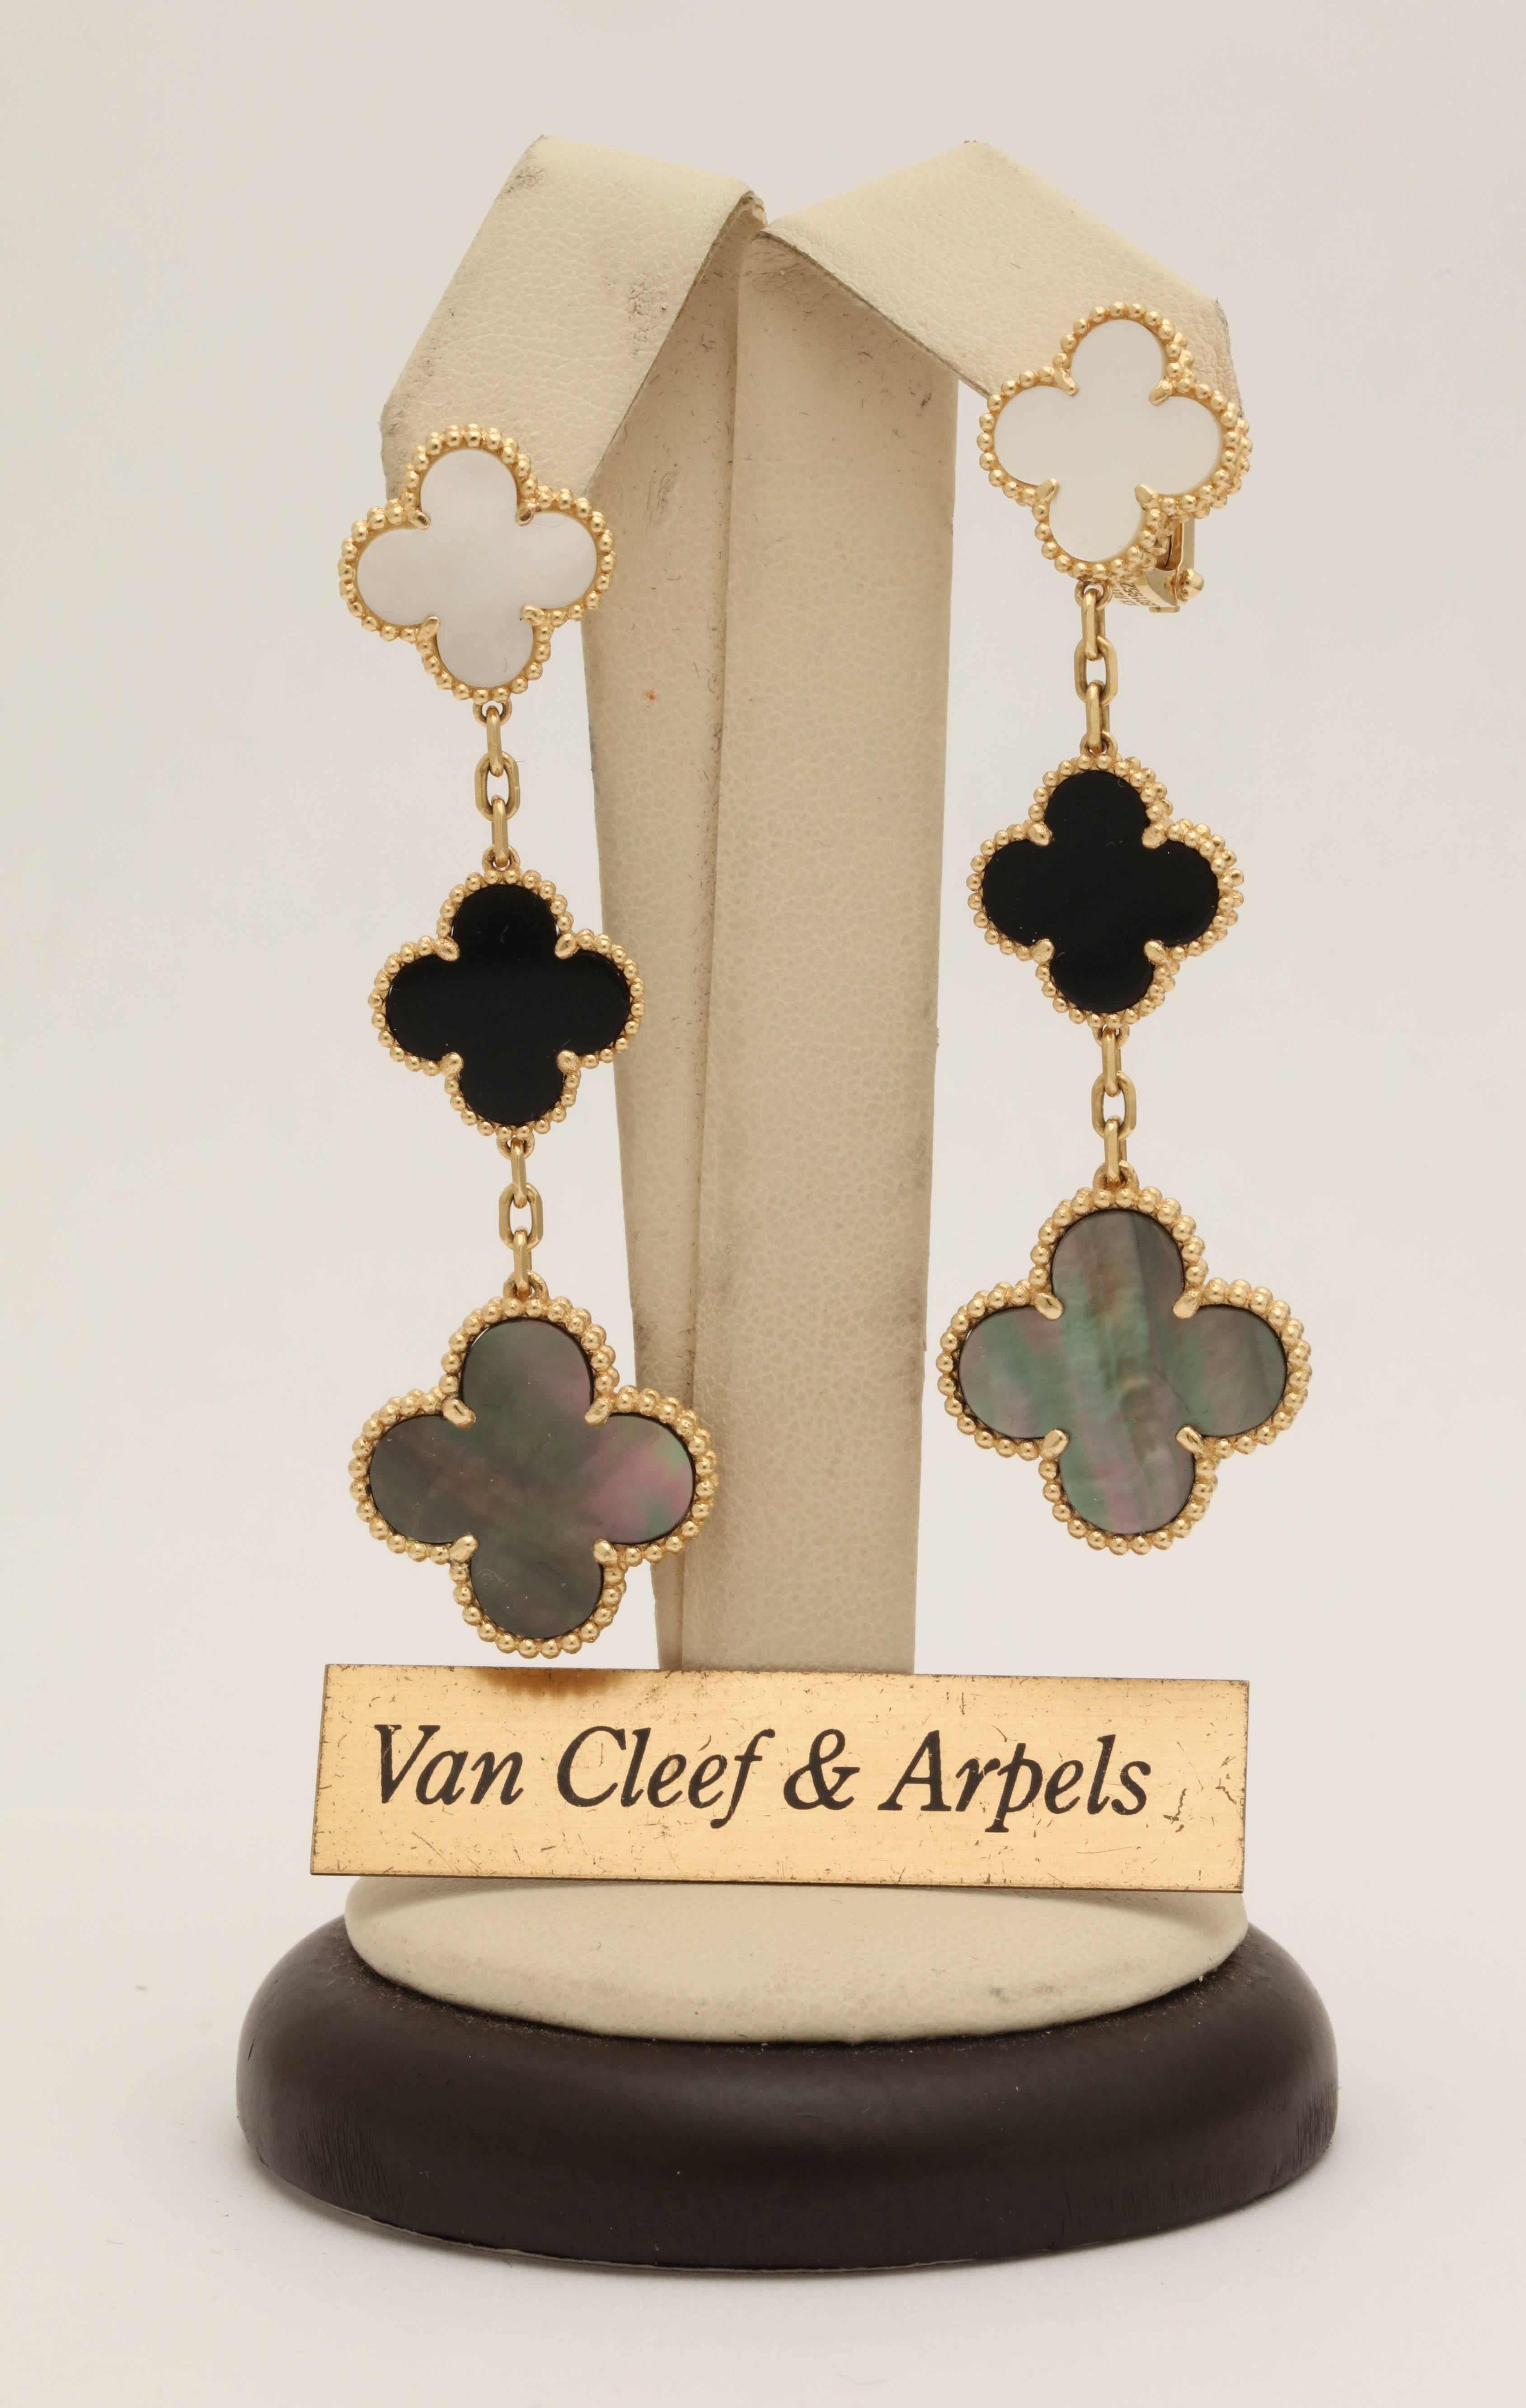 One Pair Of Ladies 18kt Yellow Gold Alhambra Dangle Earclips Composed Of Three Different Floral Tiers Of Onyx And White Mother Of Pearl Clovers And Dark Mother Of Pearl Clovers On The Bottom Of The earrings. Note: Earrings Are For Pierced Ears And